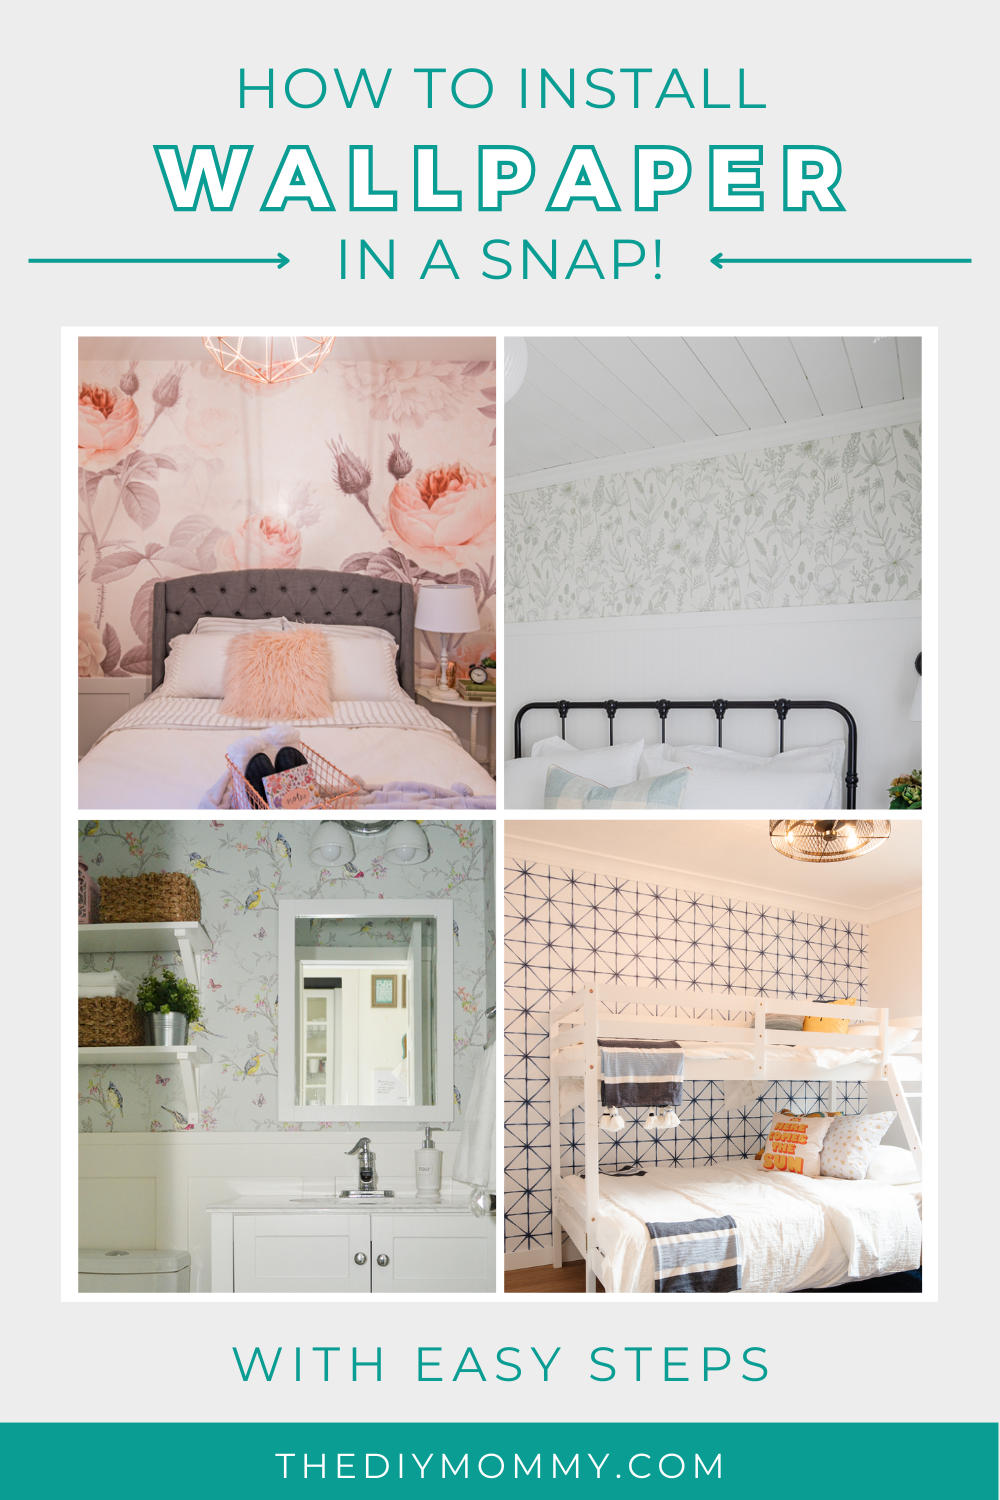 How To Install Wallpaper In A Snap (With Easy Steps)